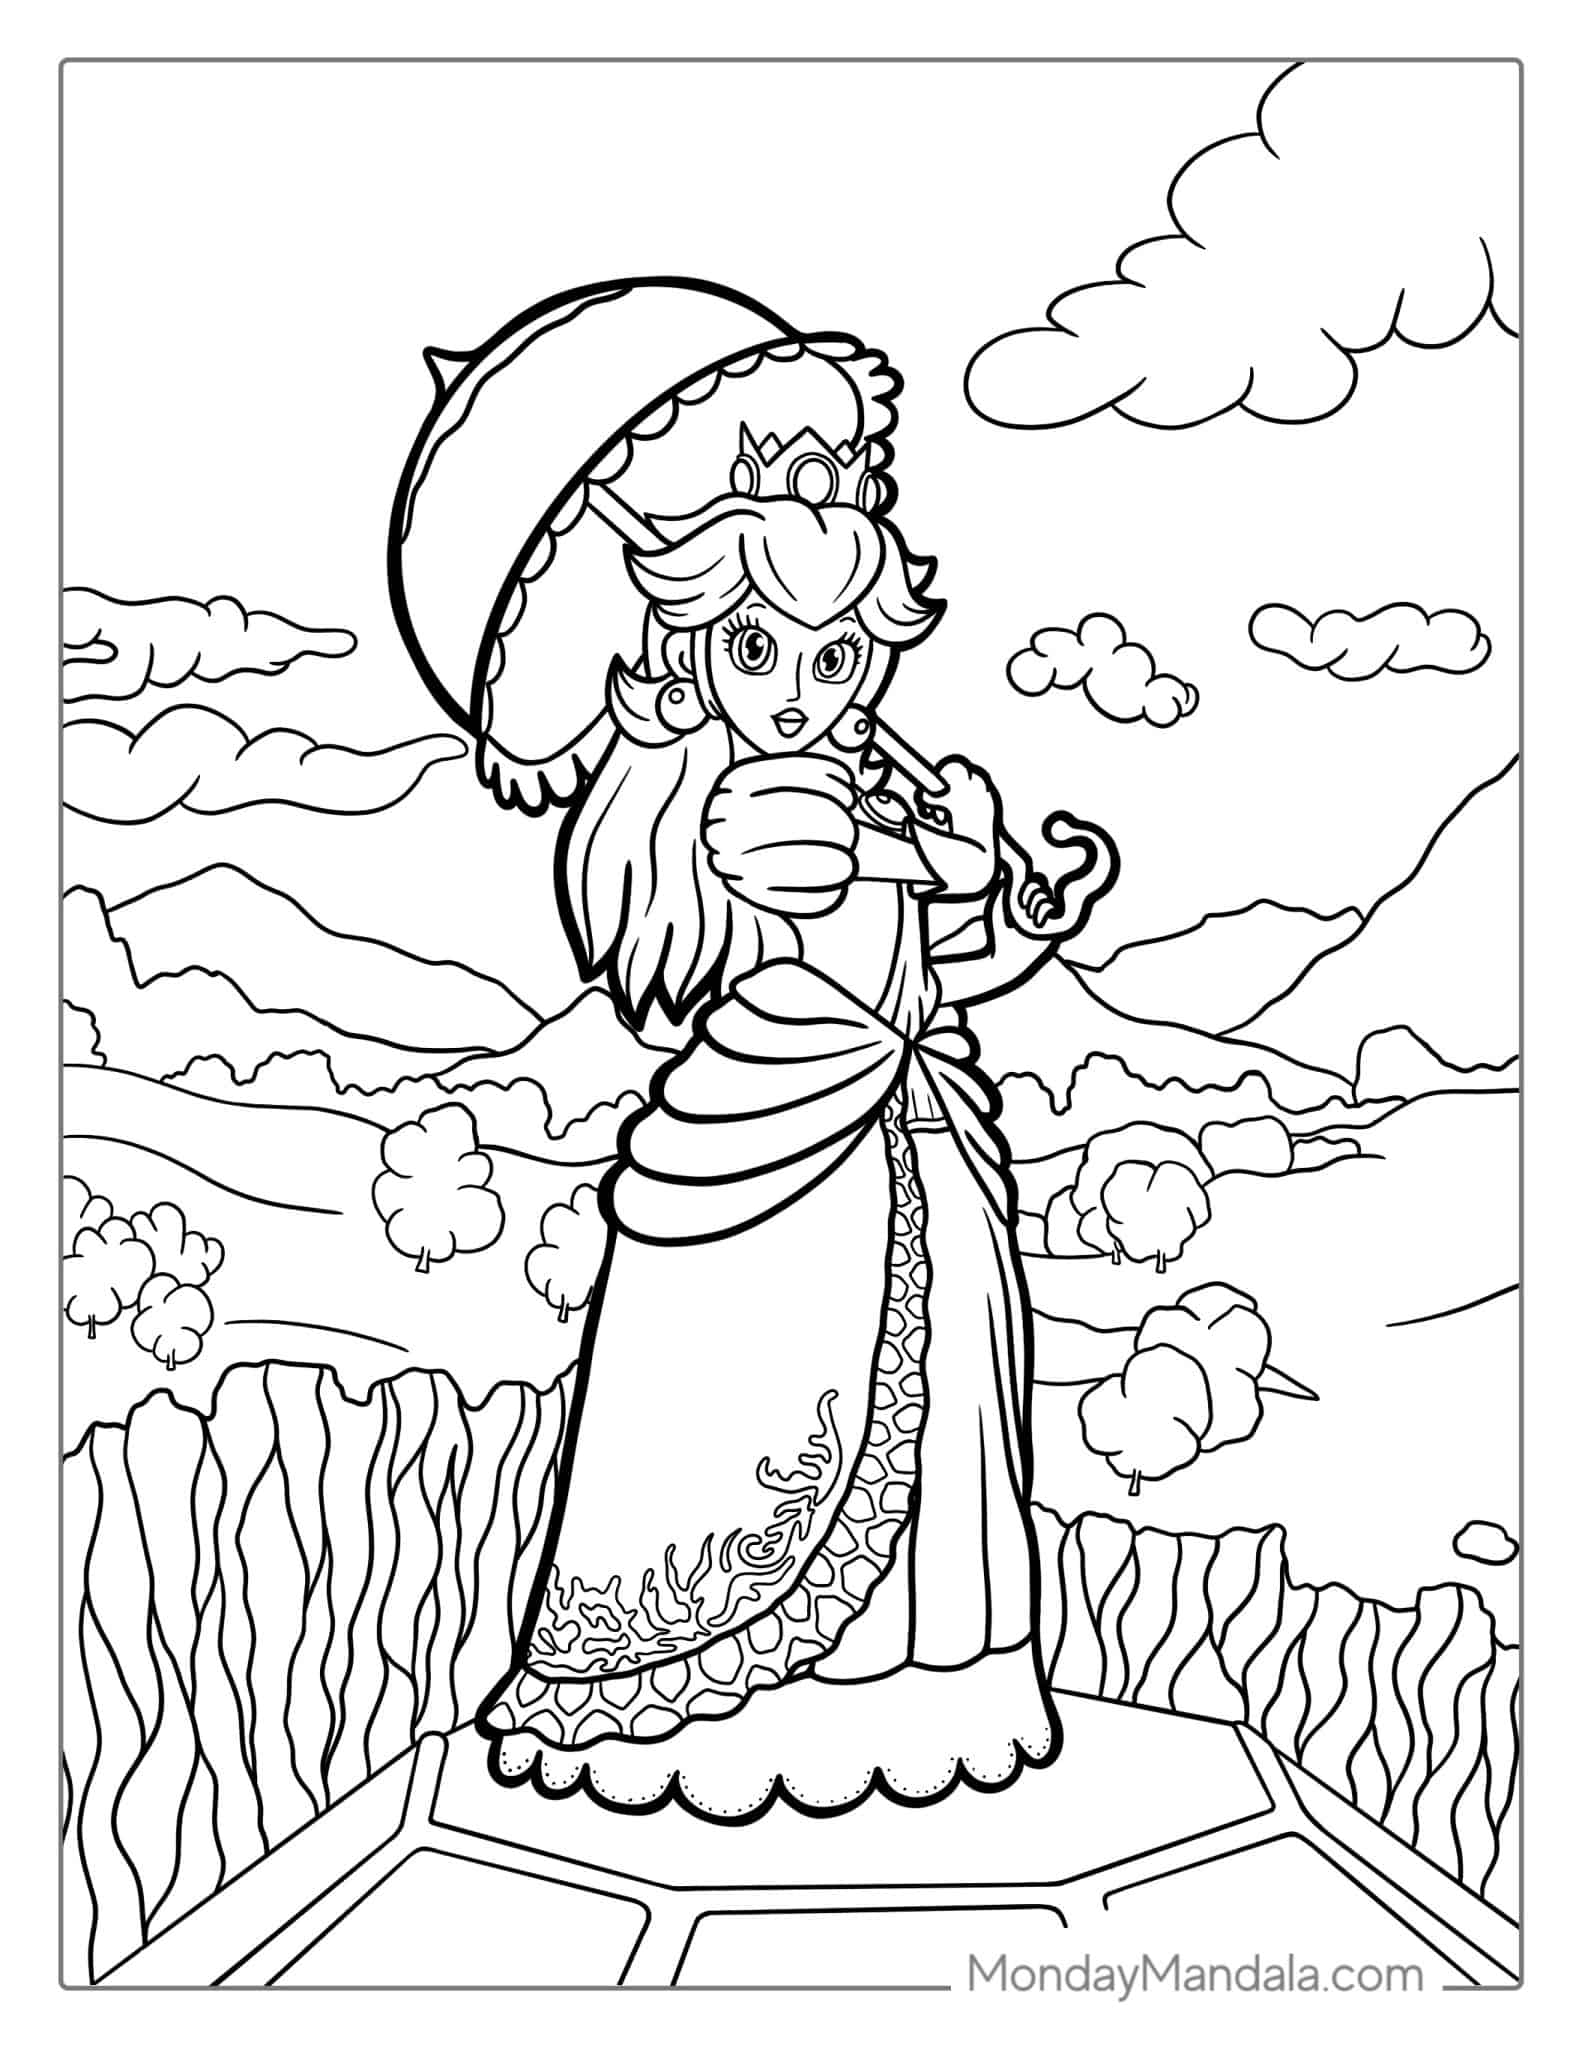 Princess Peach Coloring Pages for Kids 69